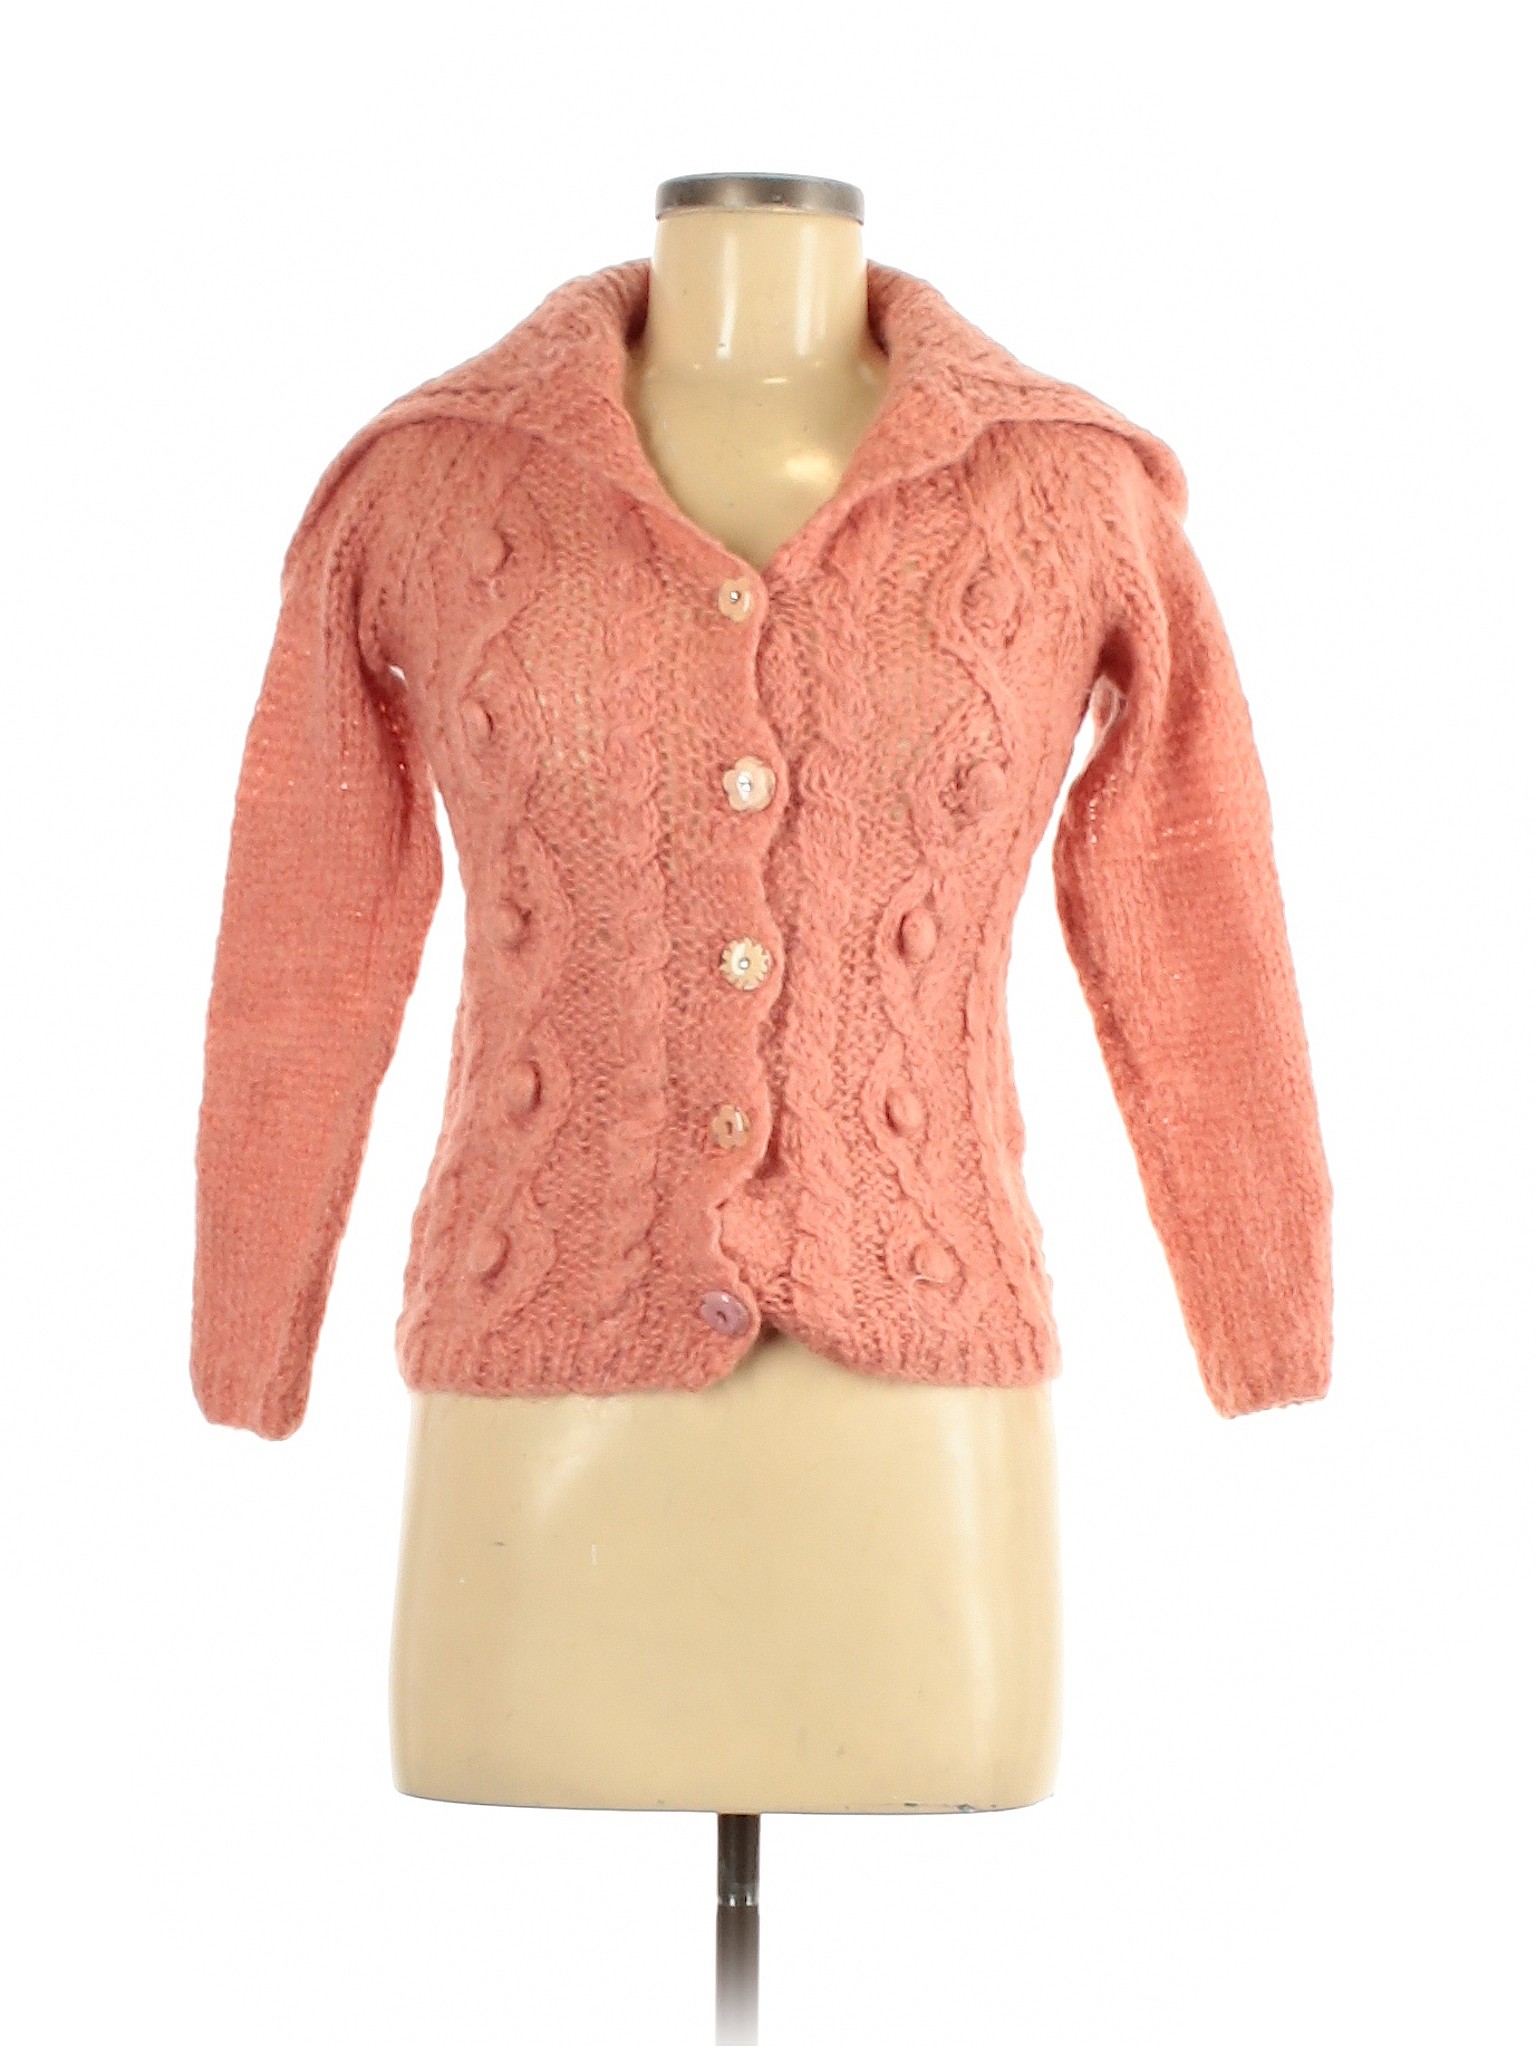 Free People Color Block Pink Wool Cardigan Size S - 76% off | thredUP